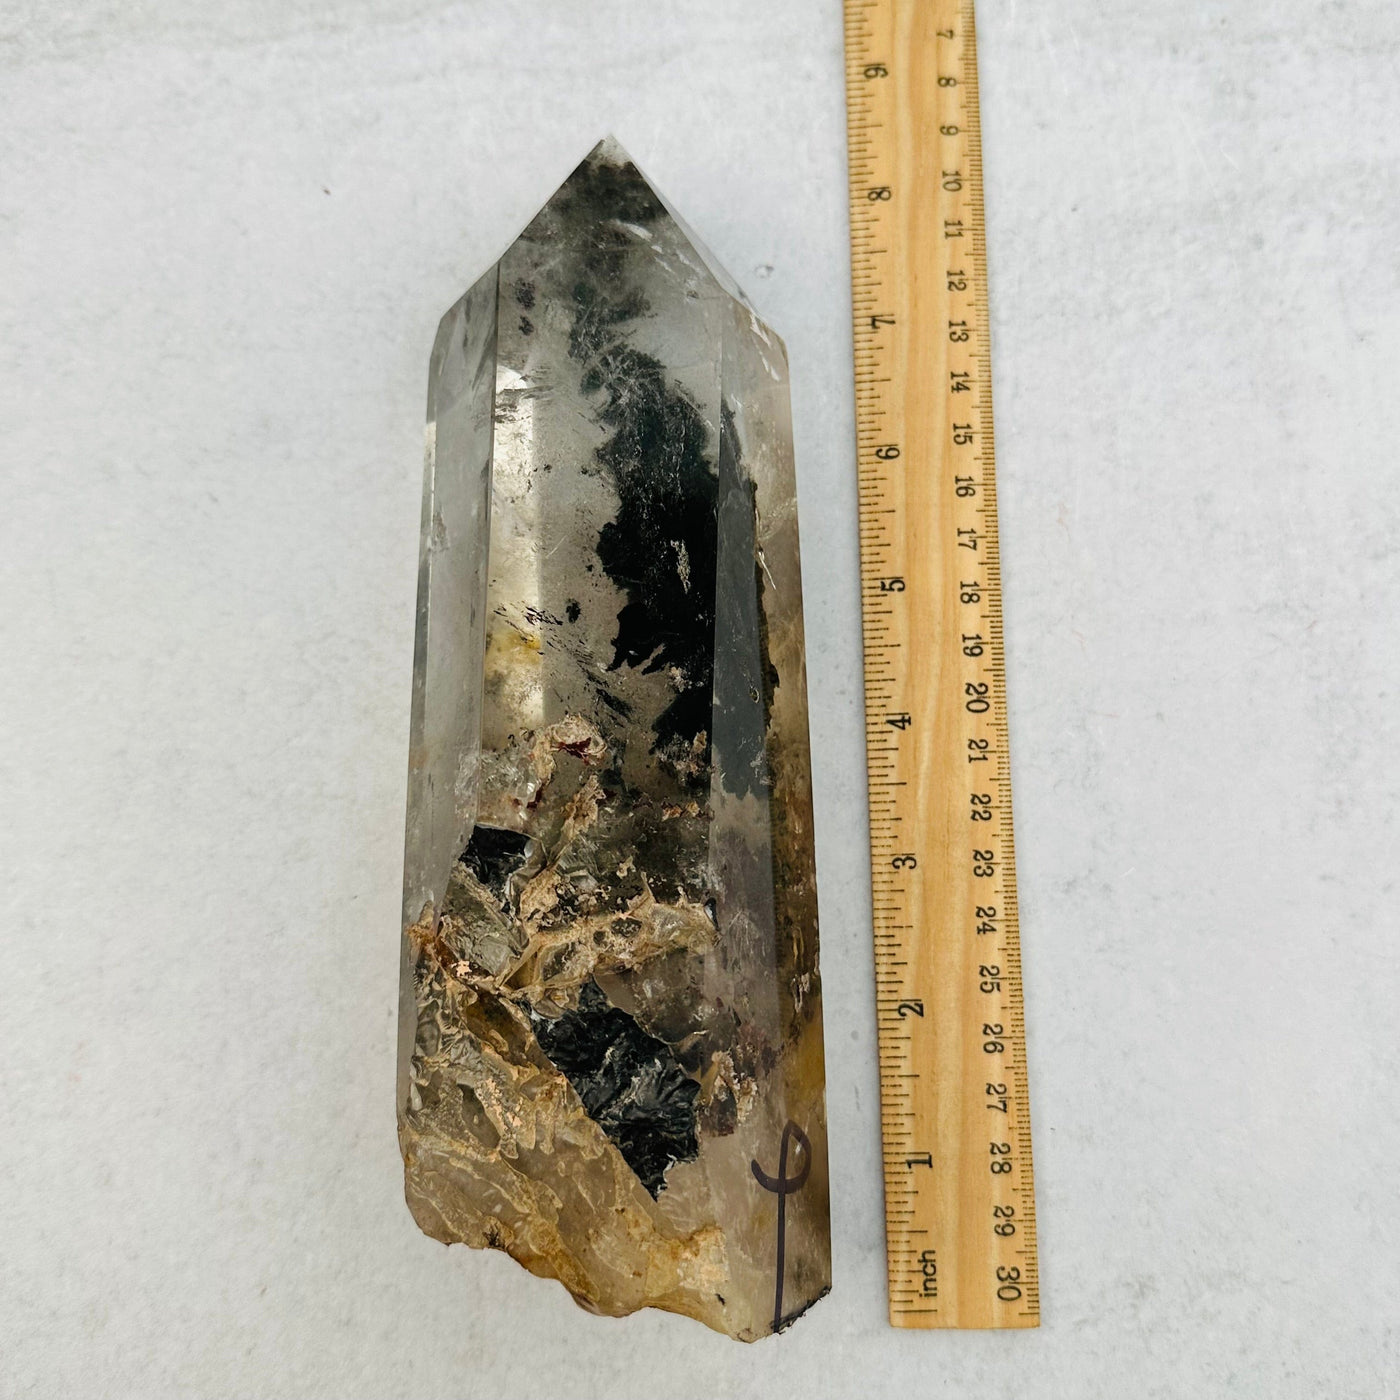 Lodolite Quartz next to a ruler for size reference 